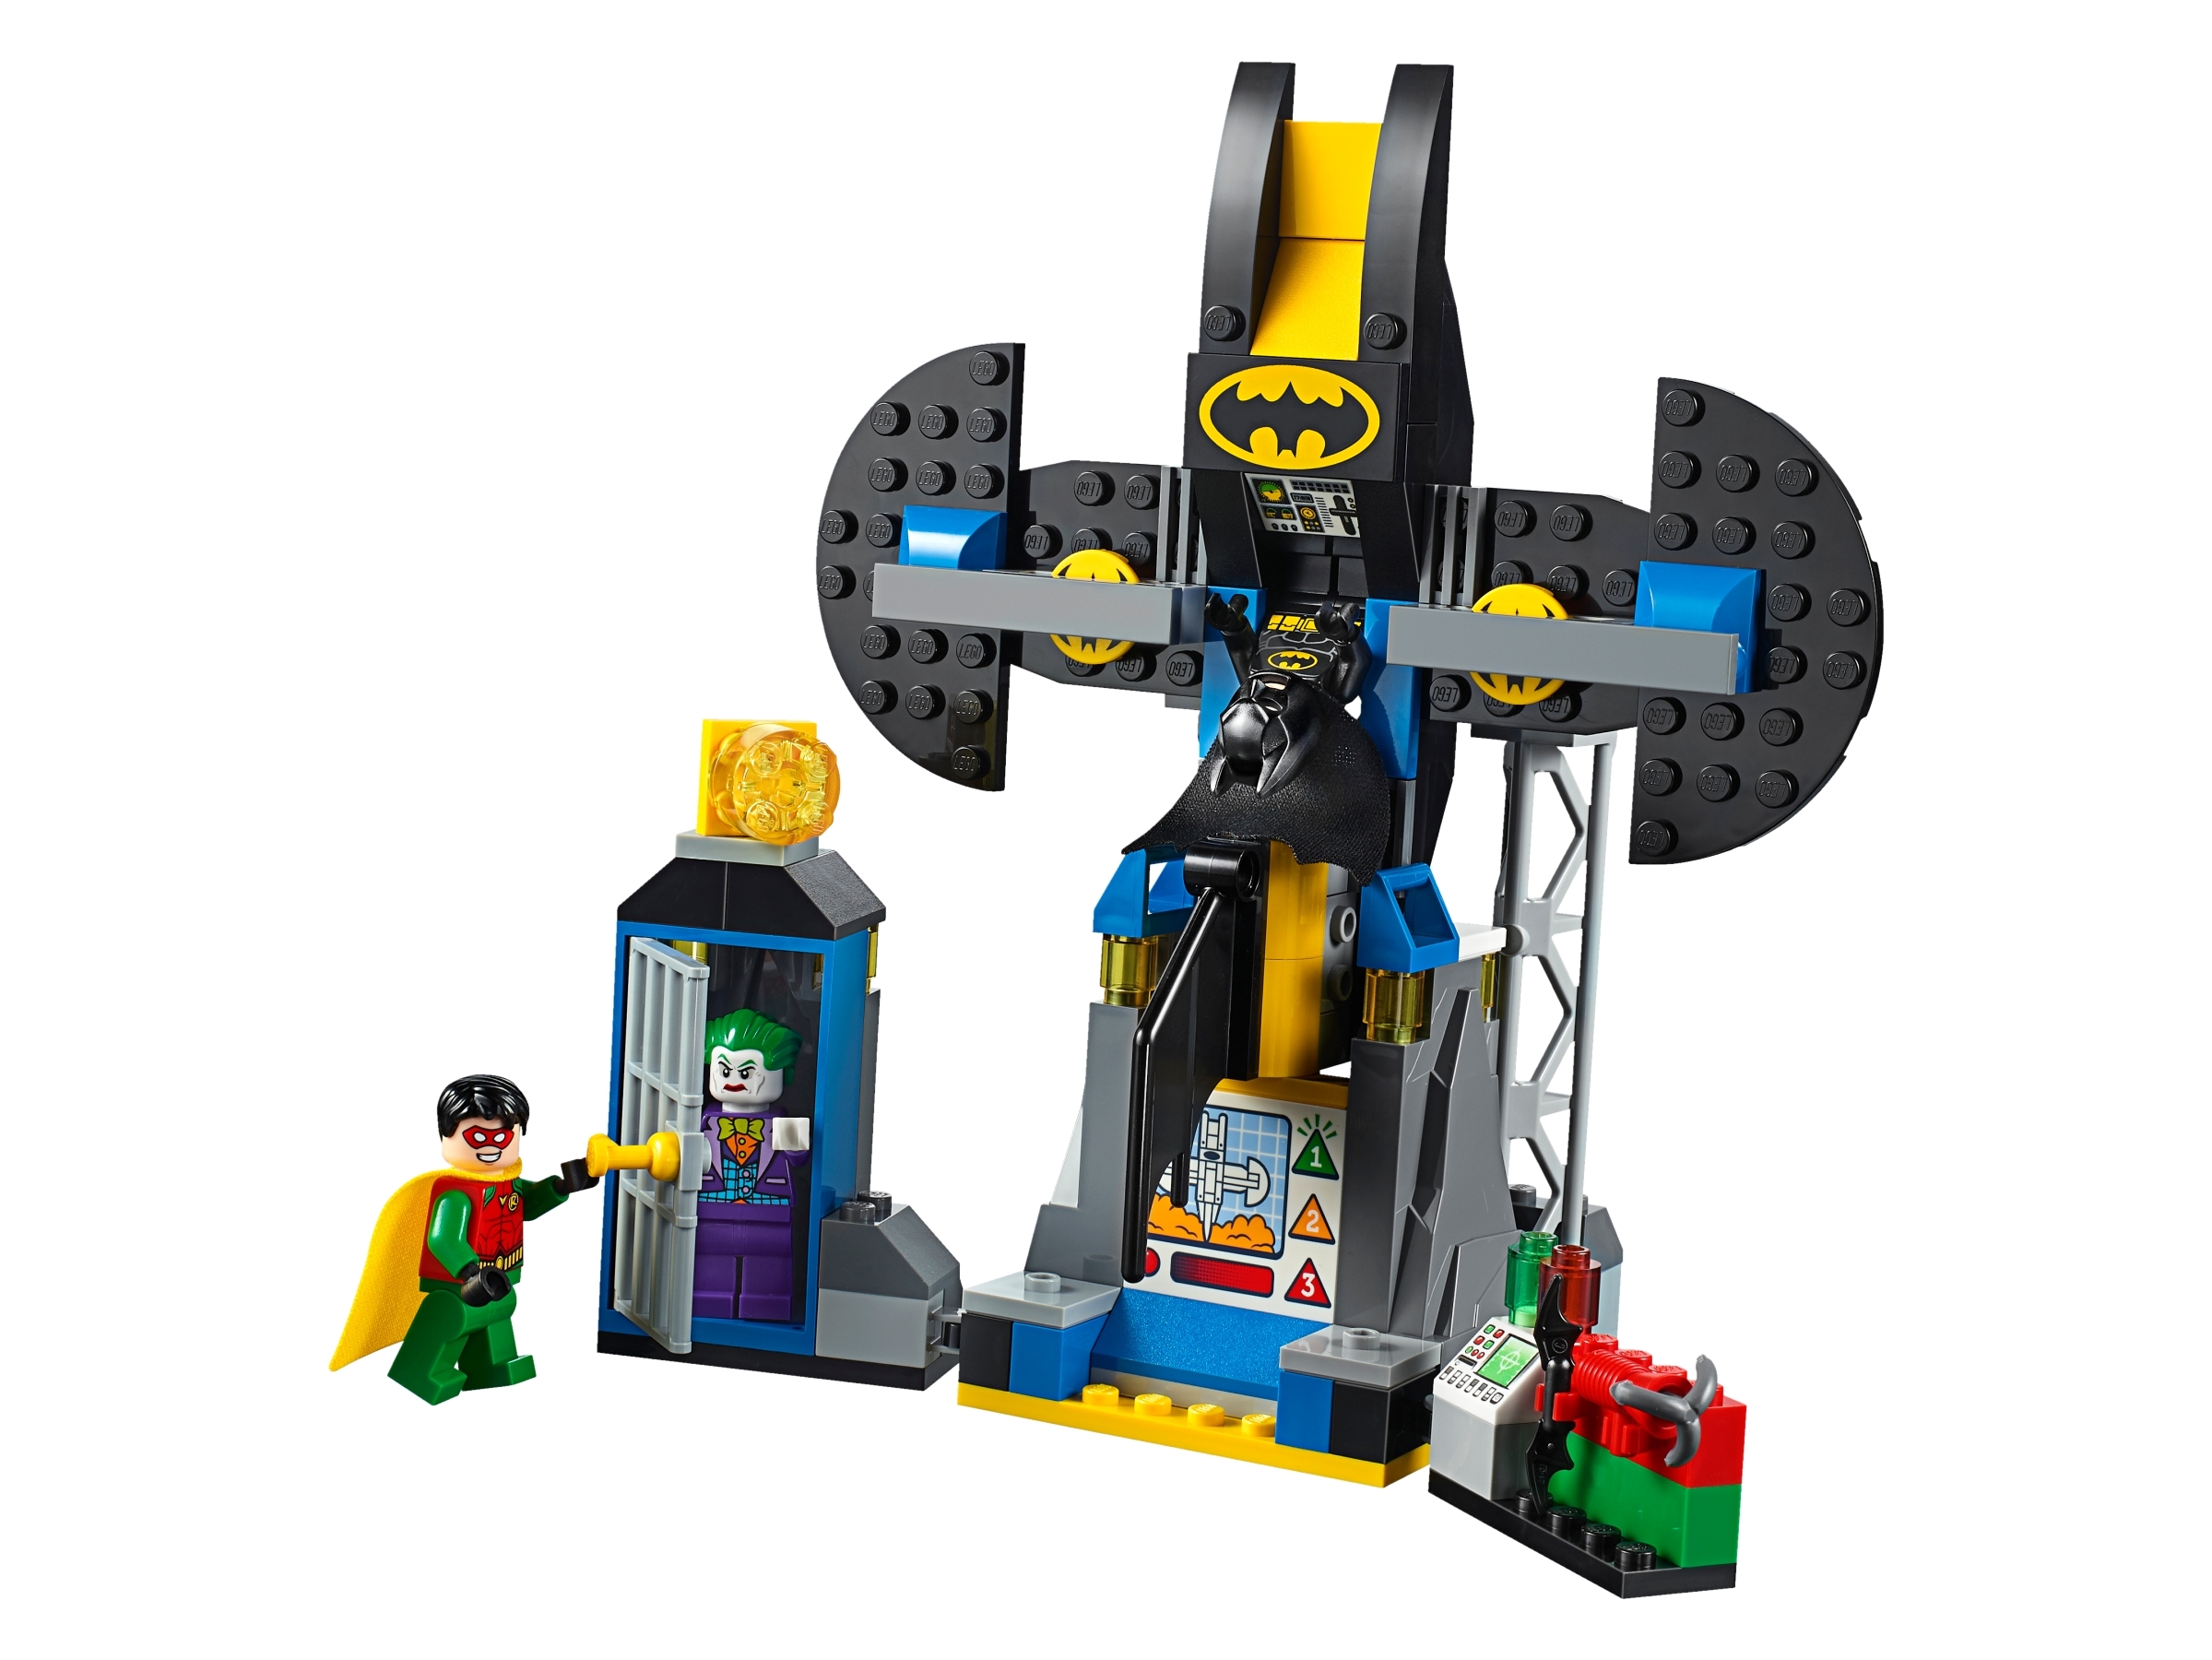 LEGO Juniors/4 151 Pieces DC The Joker Batcave Attack 10753 Building Kit Discontinued by Manufacturer 